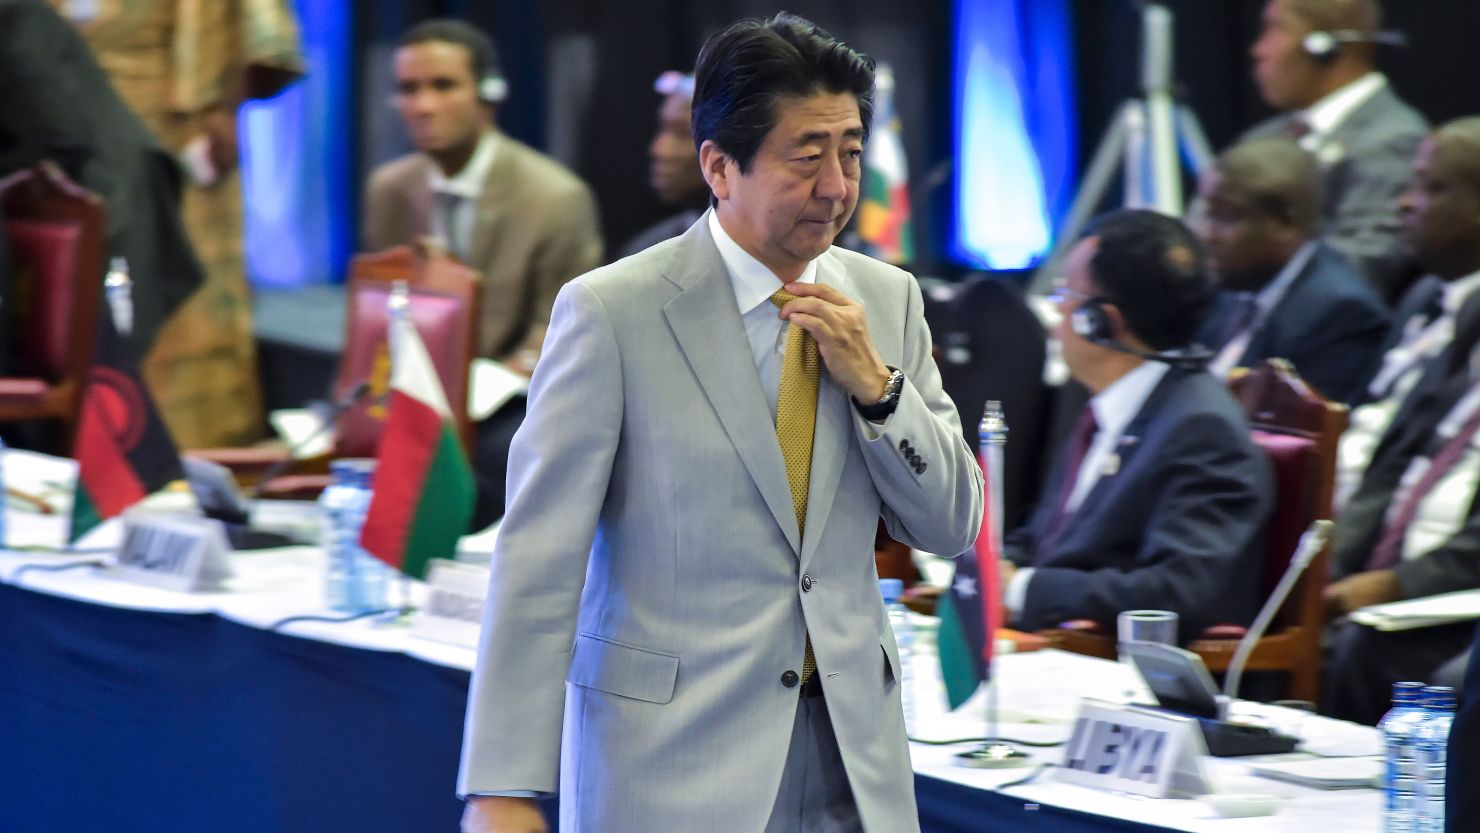 Japanese Prime Minister Shinzo Abe attends the TICAD (Tokyo International Conference on African Development) conference in August 28, 2016 in Nairobi, Kenya.